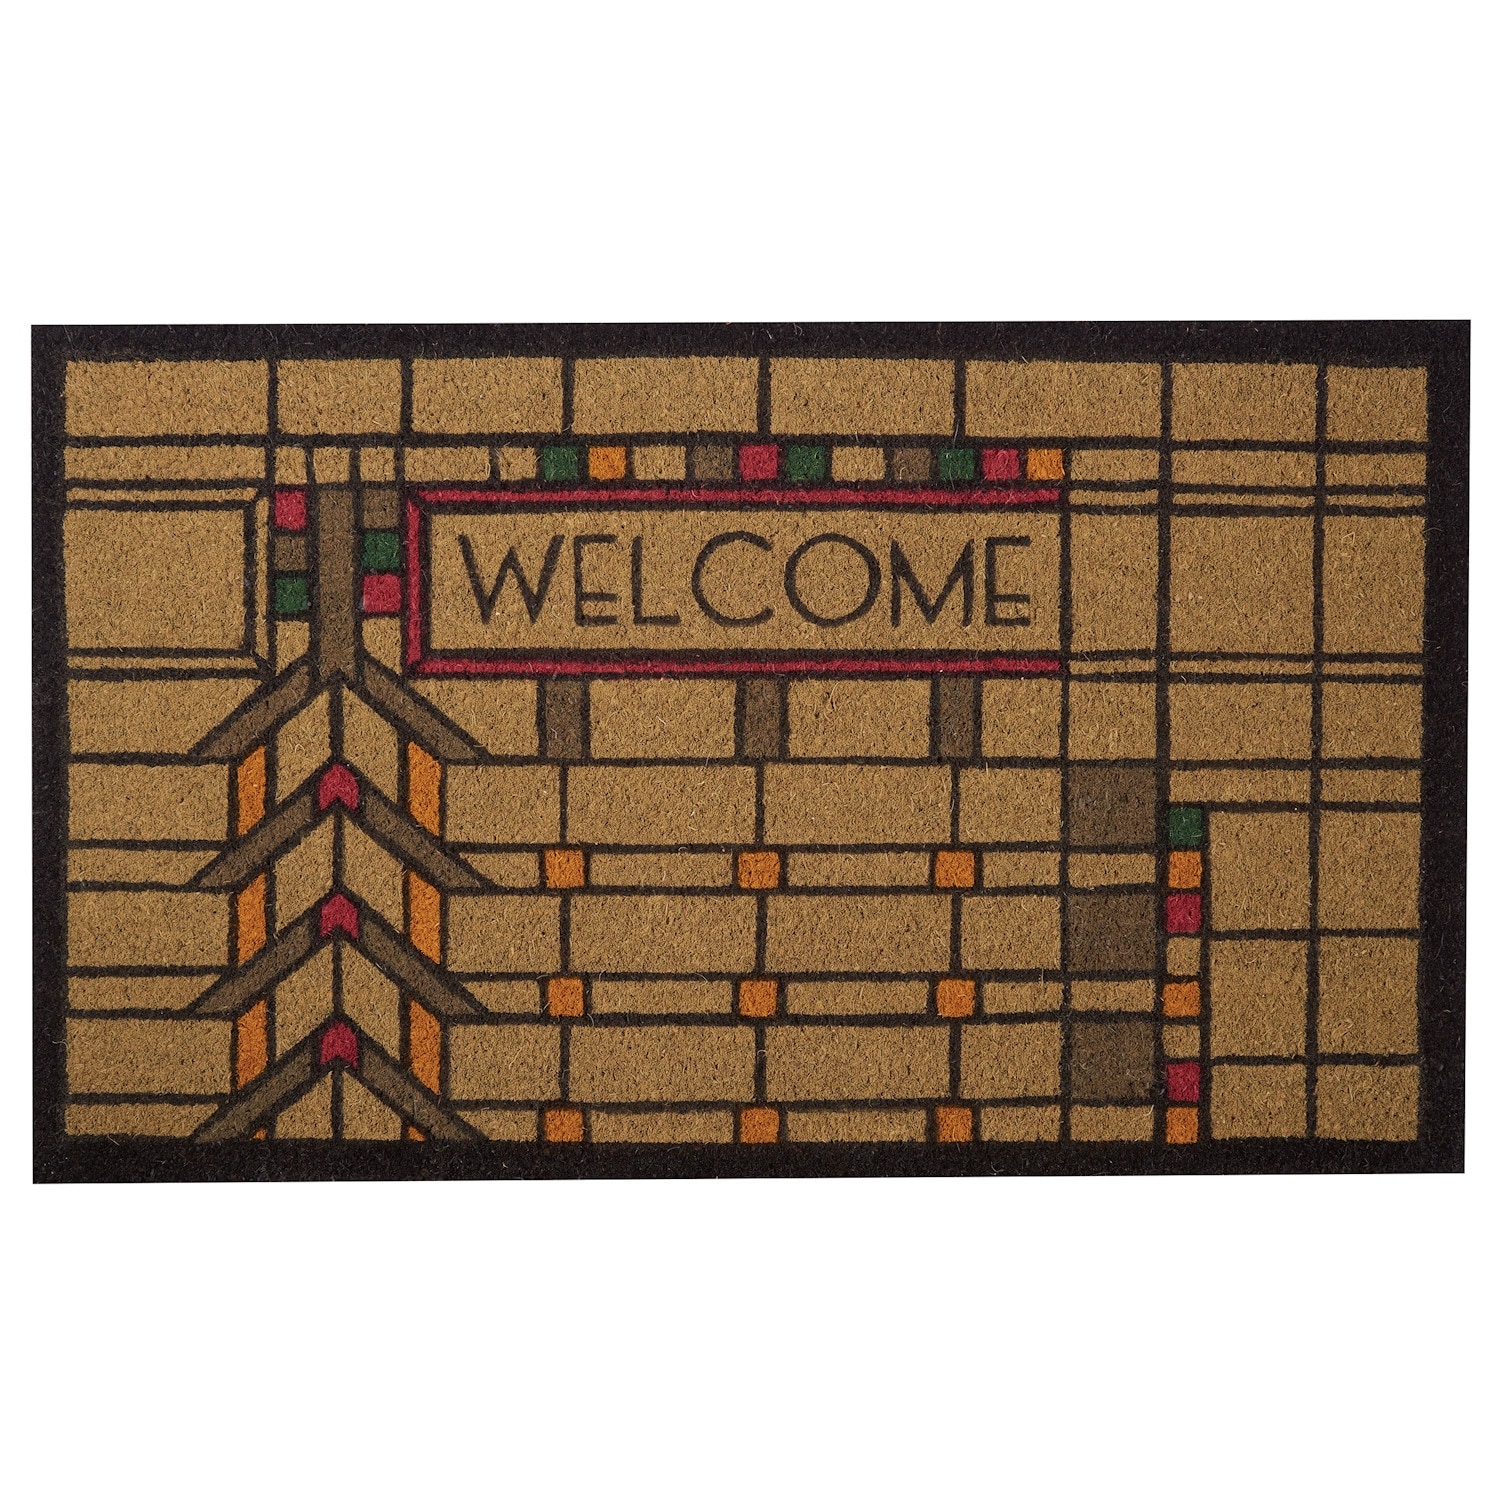 https://ak1.ostkcdn.com/images/products/is/images/direct/ffd1b4cb137fbf8147e2c359b4ff63f51bae535d/Frank-Lloyd-Wright-Tree-of-Life-Doormat-Indoor-Outdoor-Coir-Welcome-Mat-Rubber-Backed-Decorative-Door-Mat%2C-30%22-x-18%22.jpg